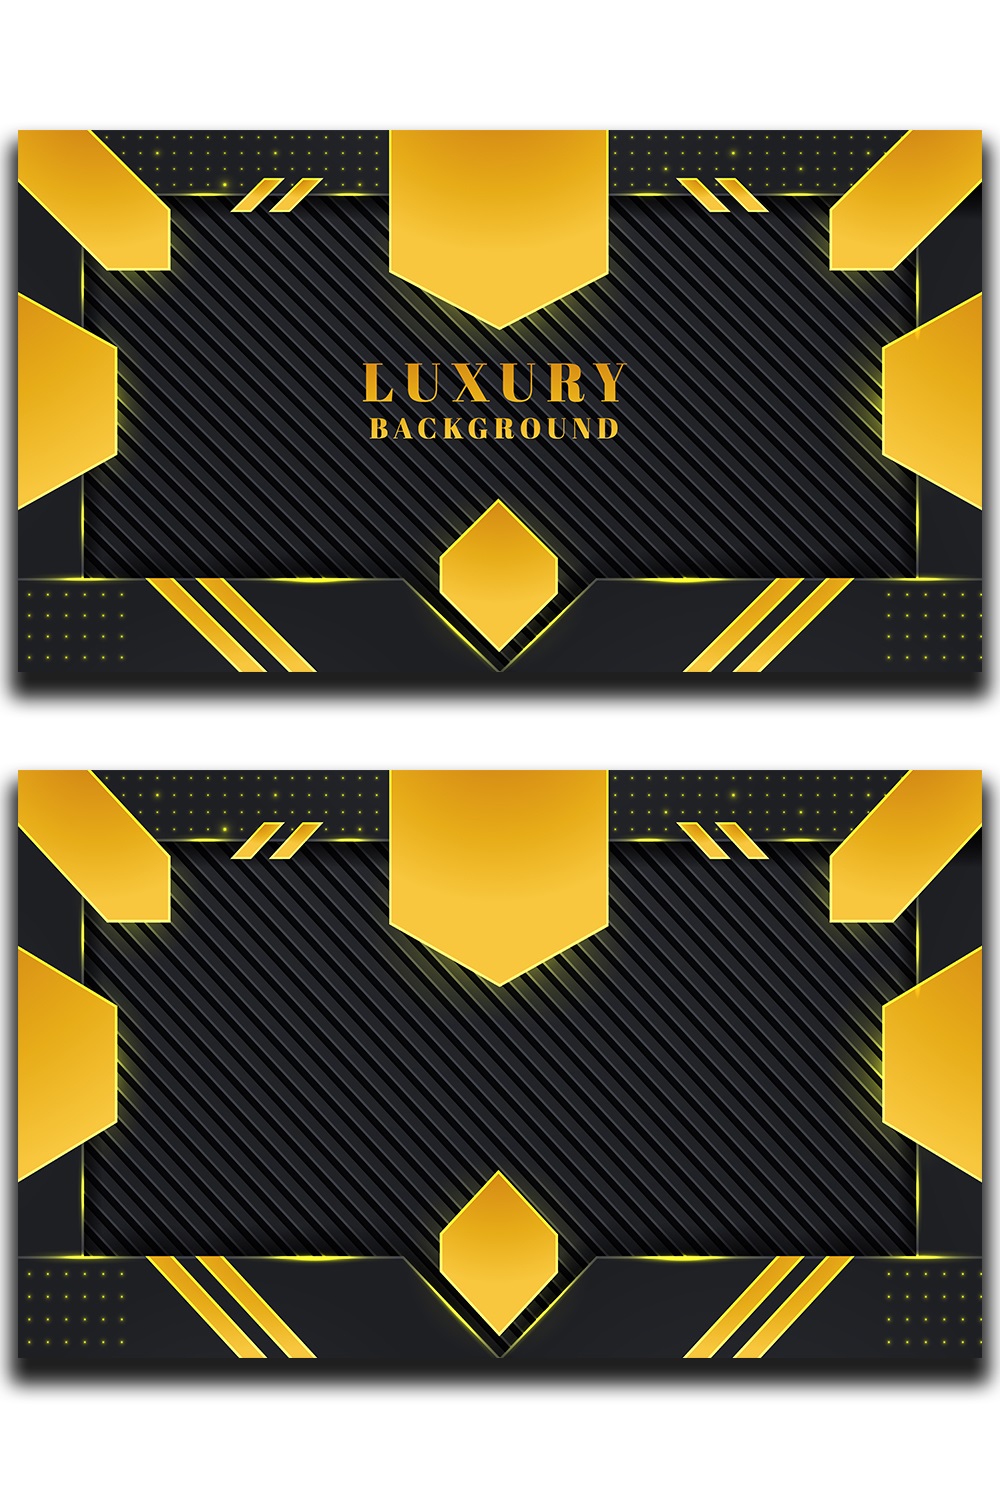 Luxury Background Design With Geometric Shapes And Line Pattern pinterest preview image.